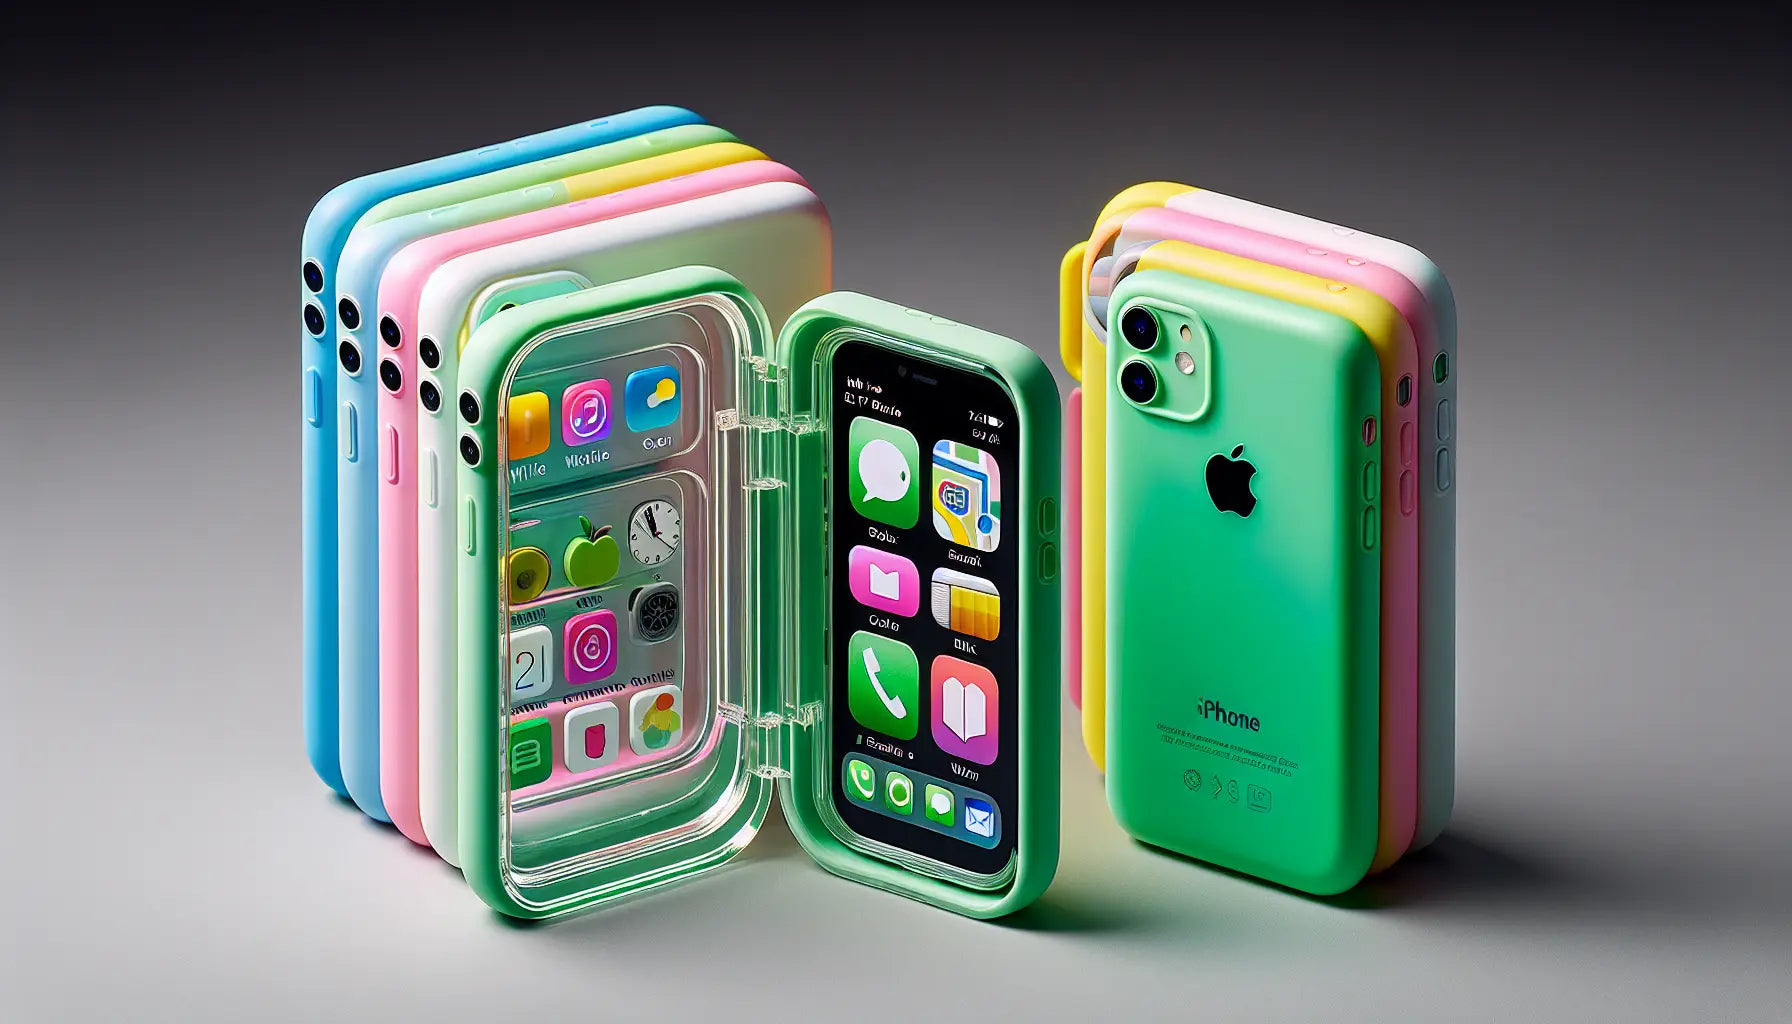 The APPLE IPHONE 5C: A Colorful and Affordable Option